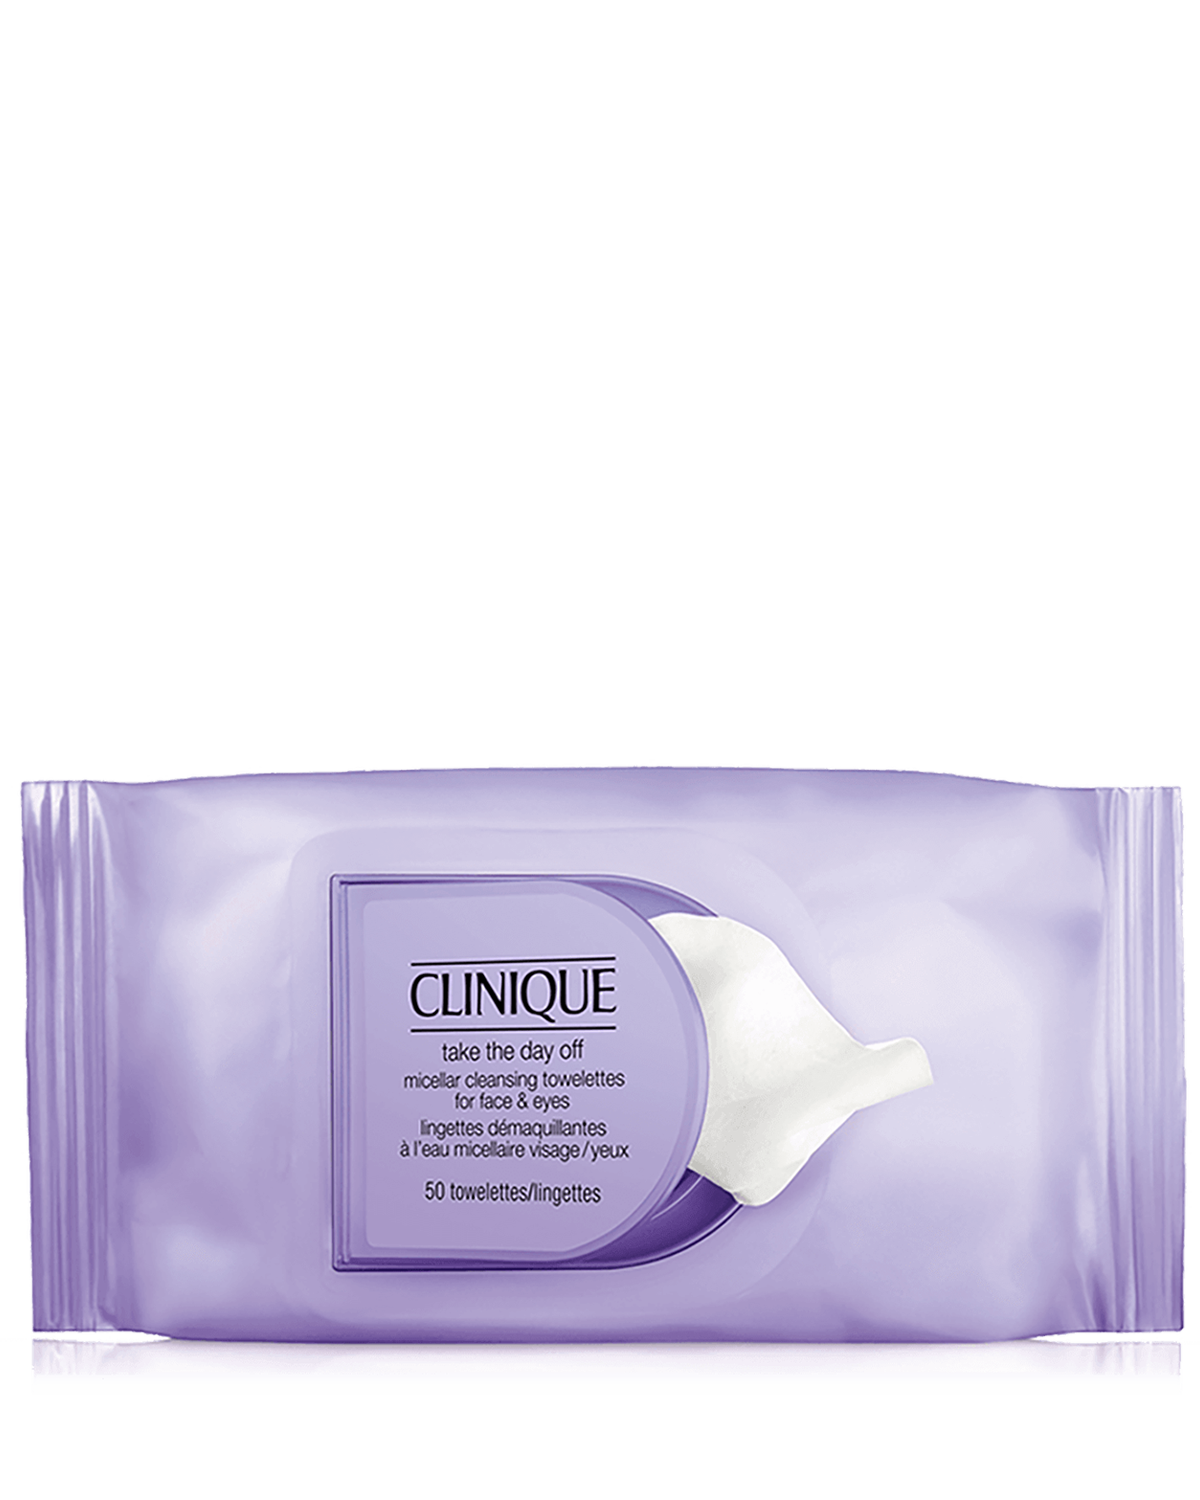 Free Full Size - Take the Day Off Micellar Cleansing Towelettes for